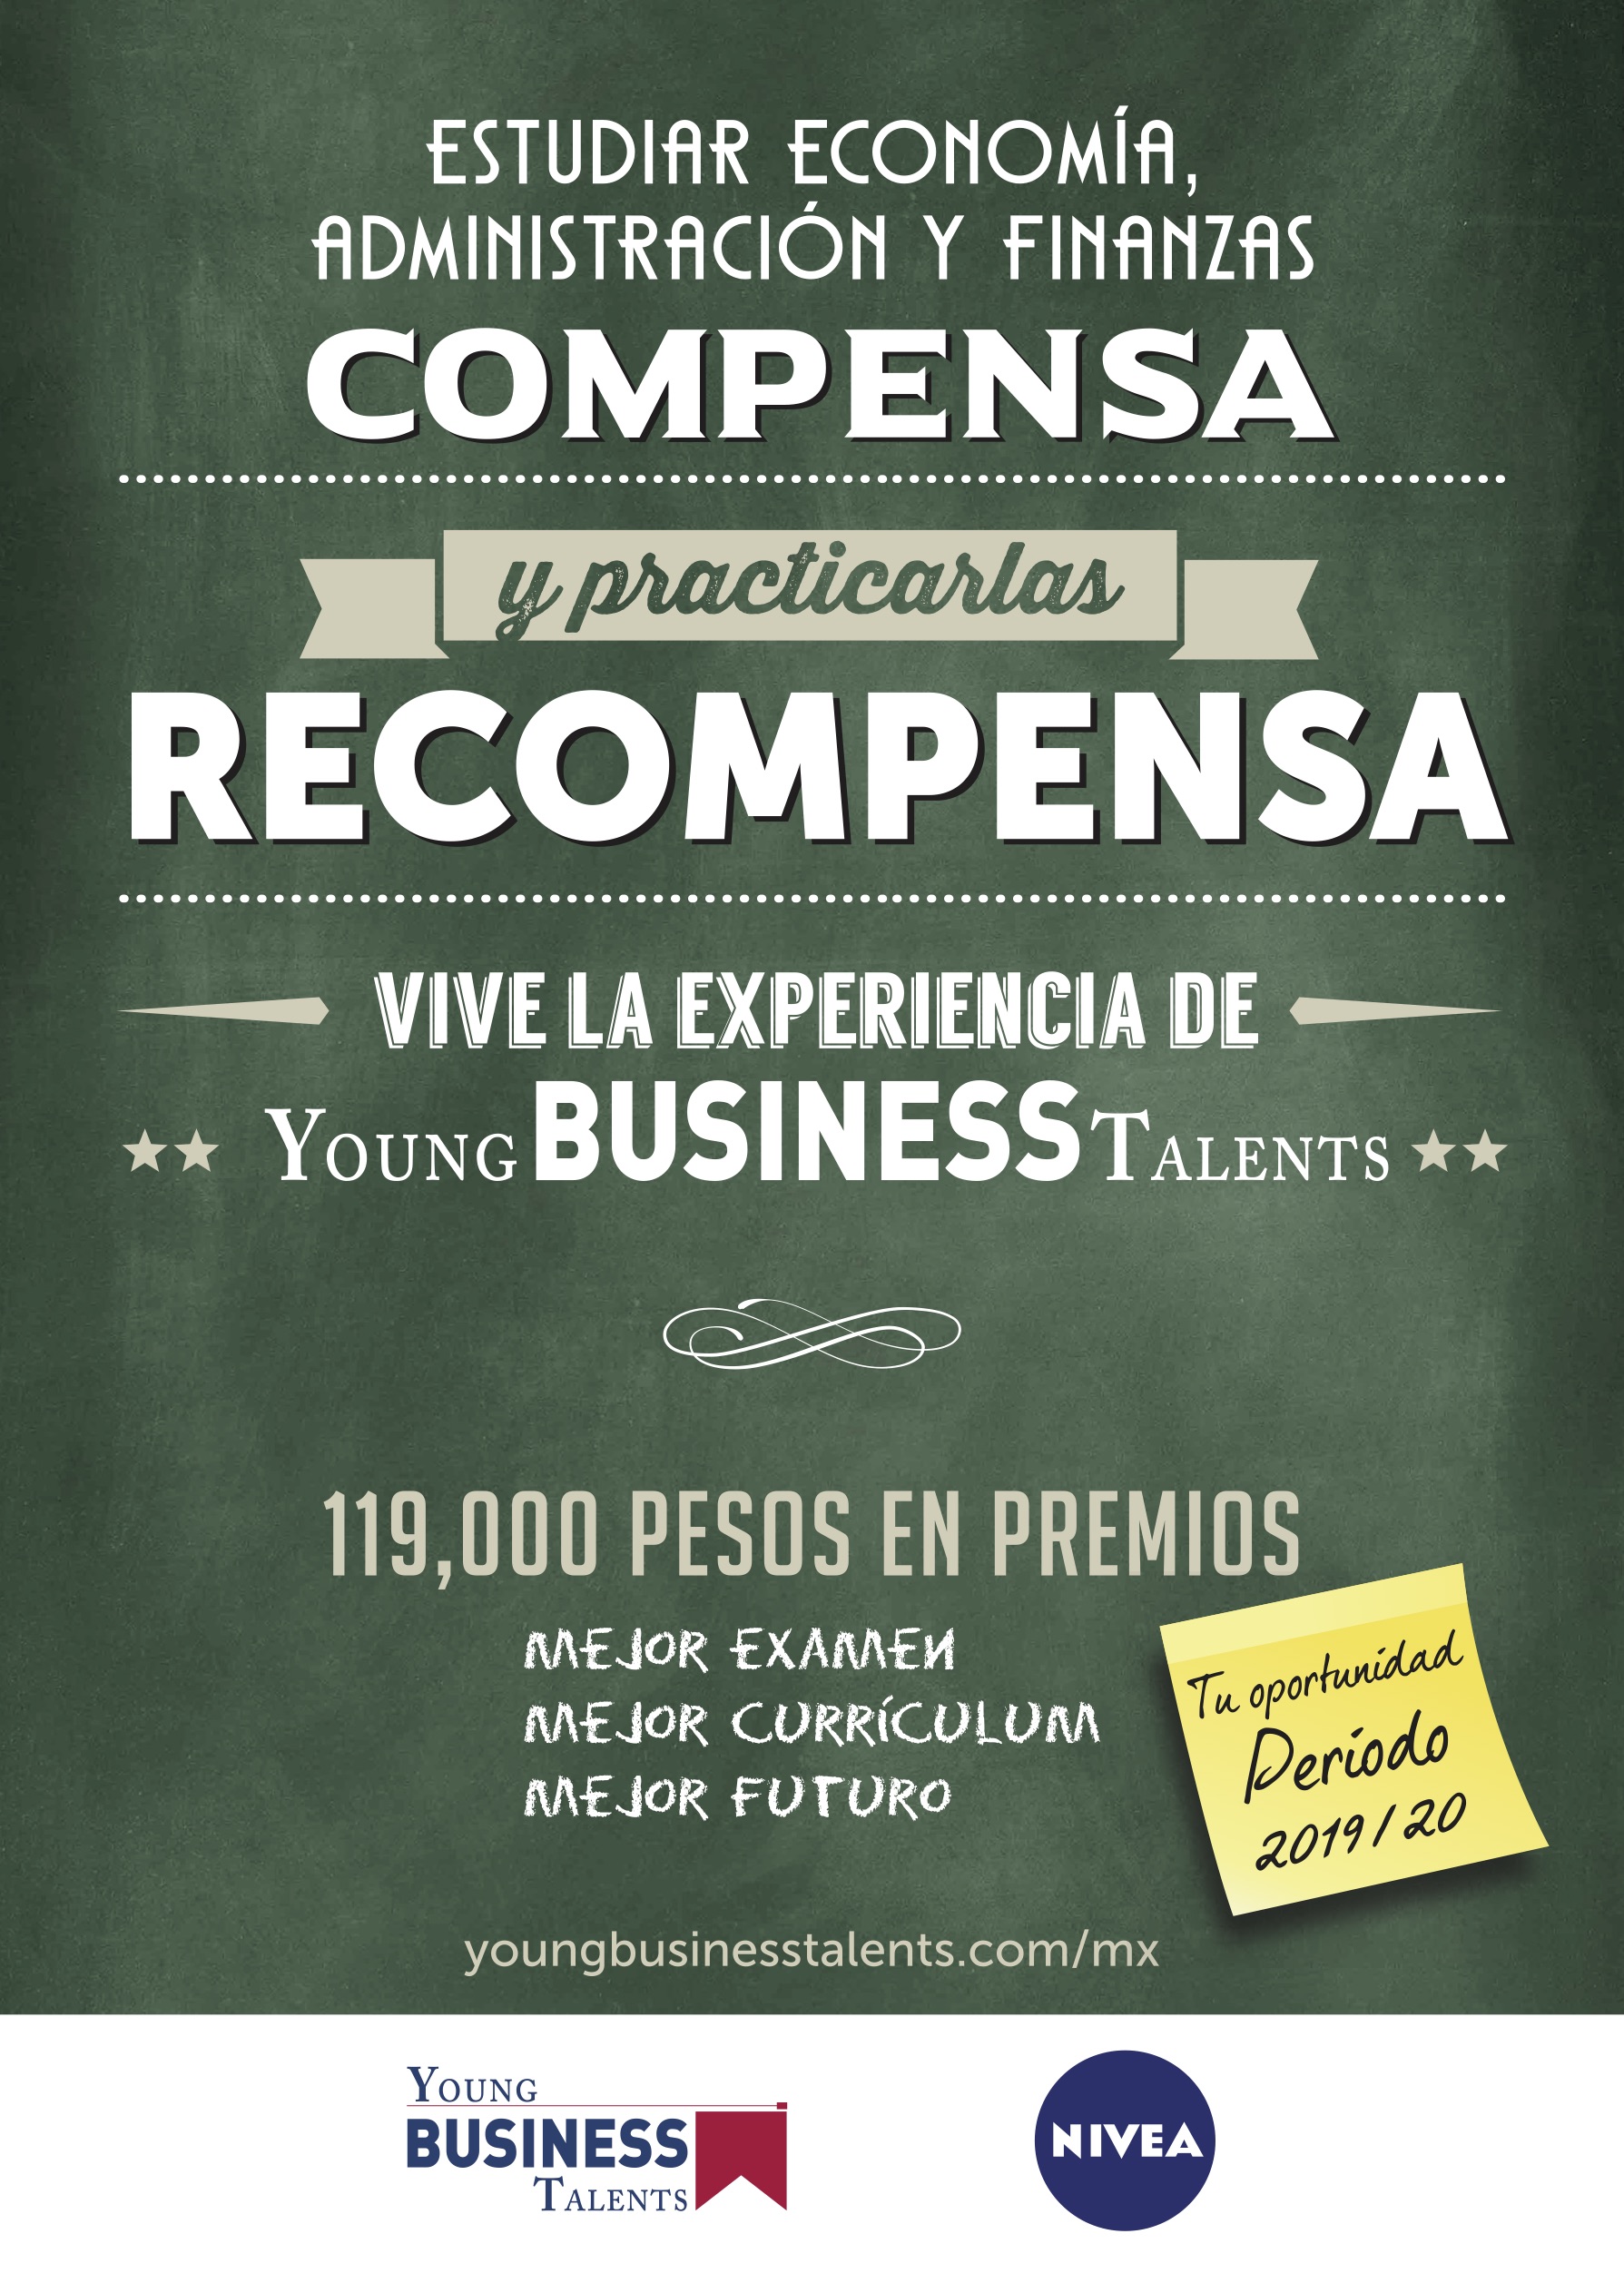 Young business talent